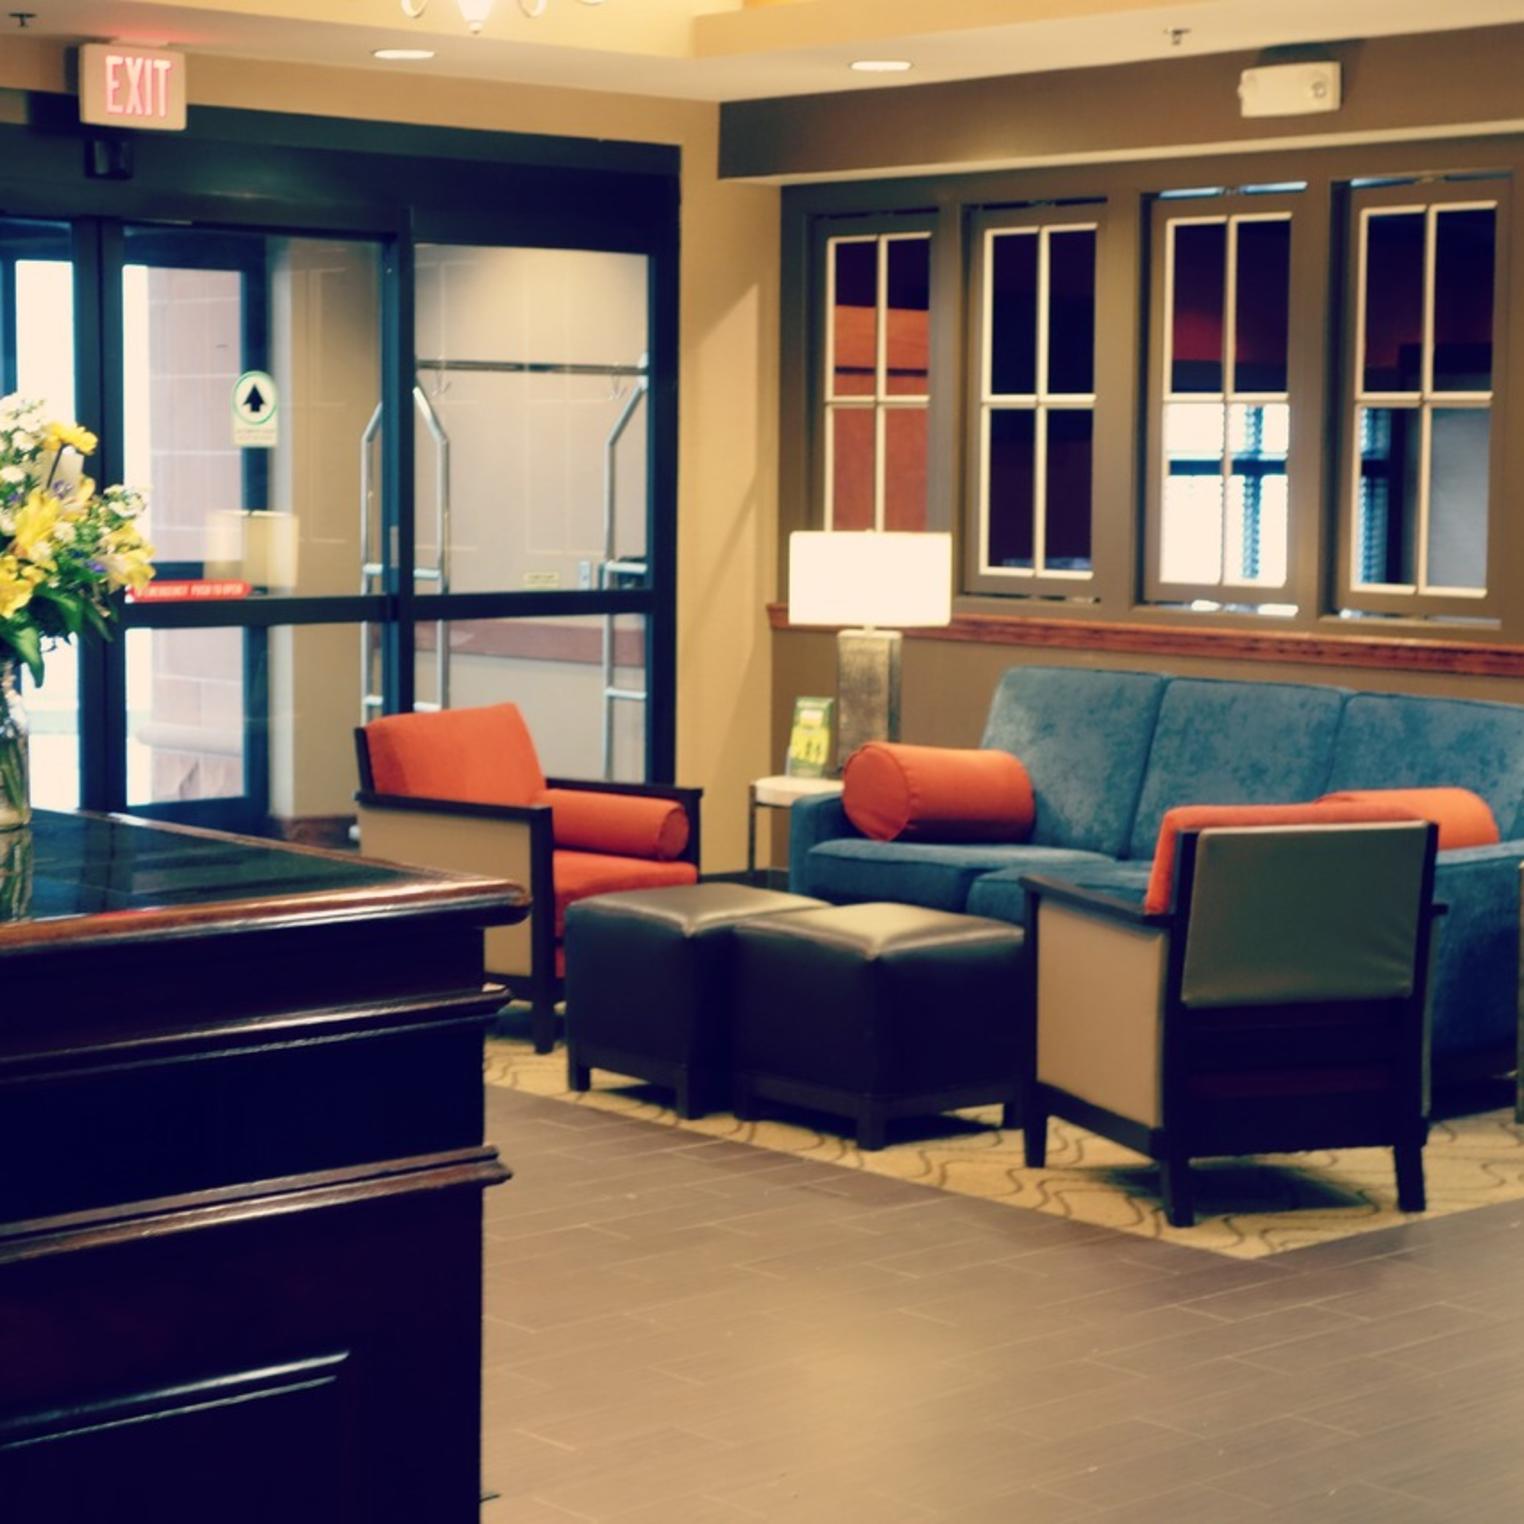 Our newly renovated lobby welcoming guests.